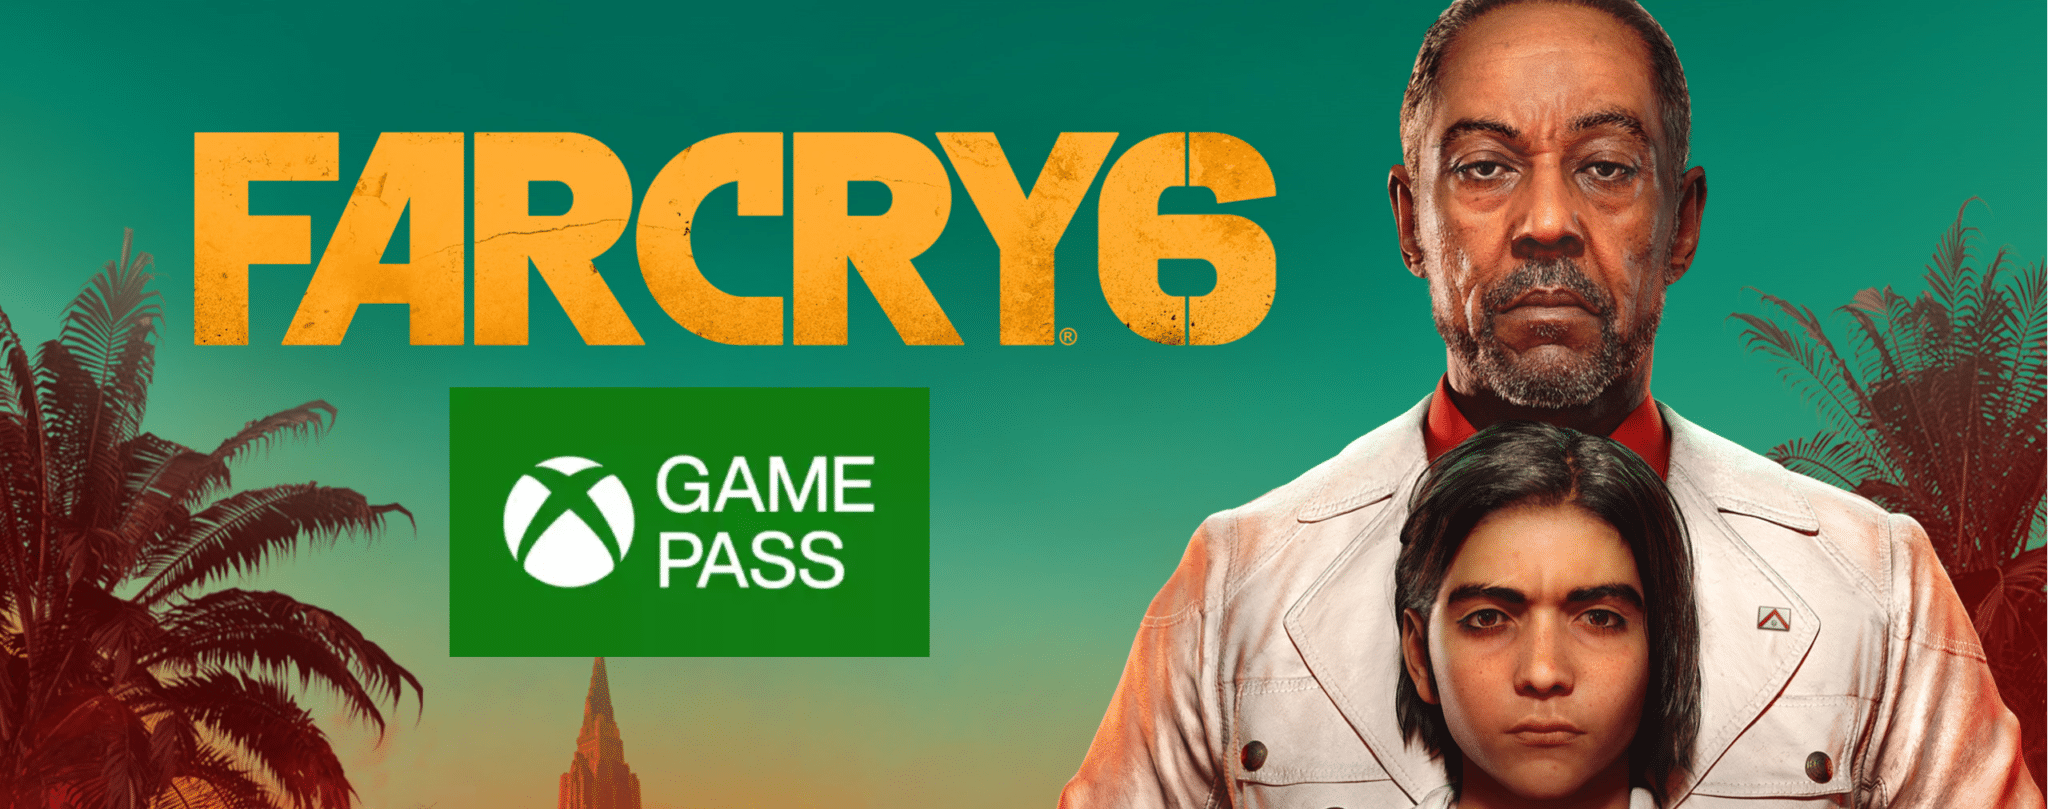 Far Cry 6 coming to Game Pass in December, along with a host of